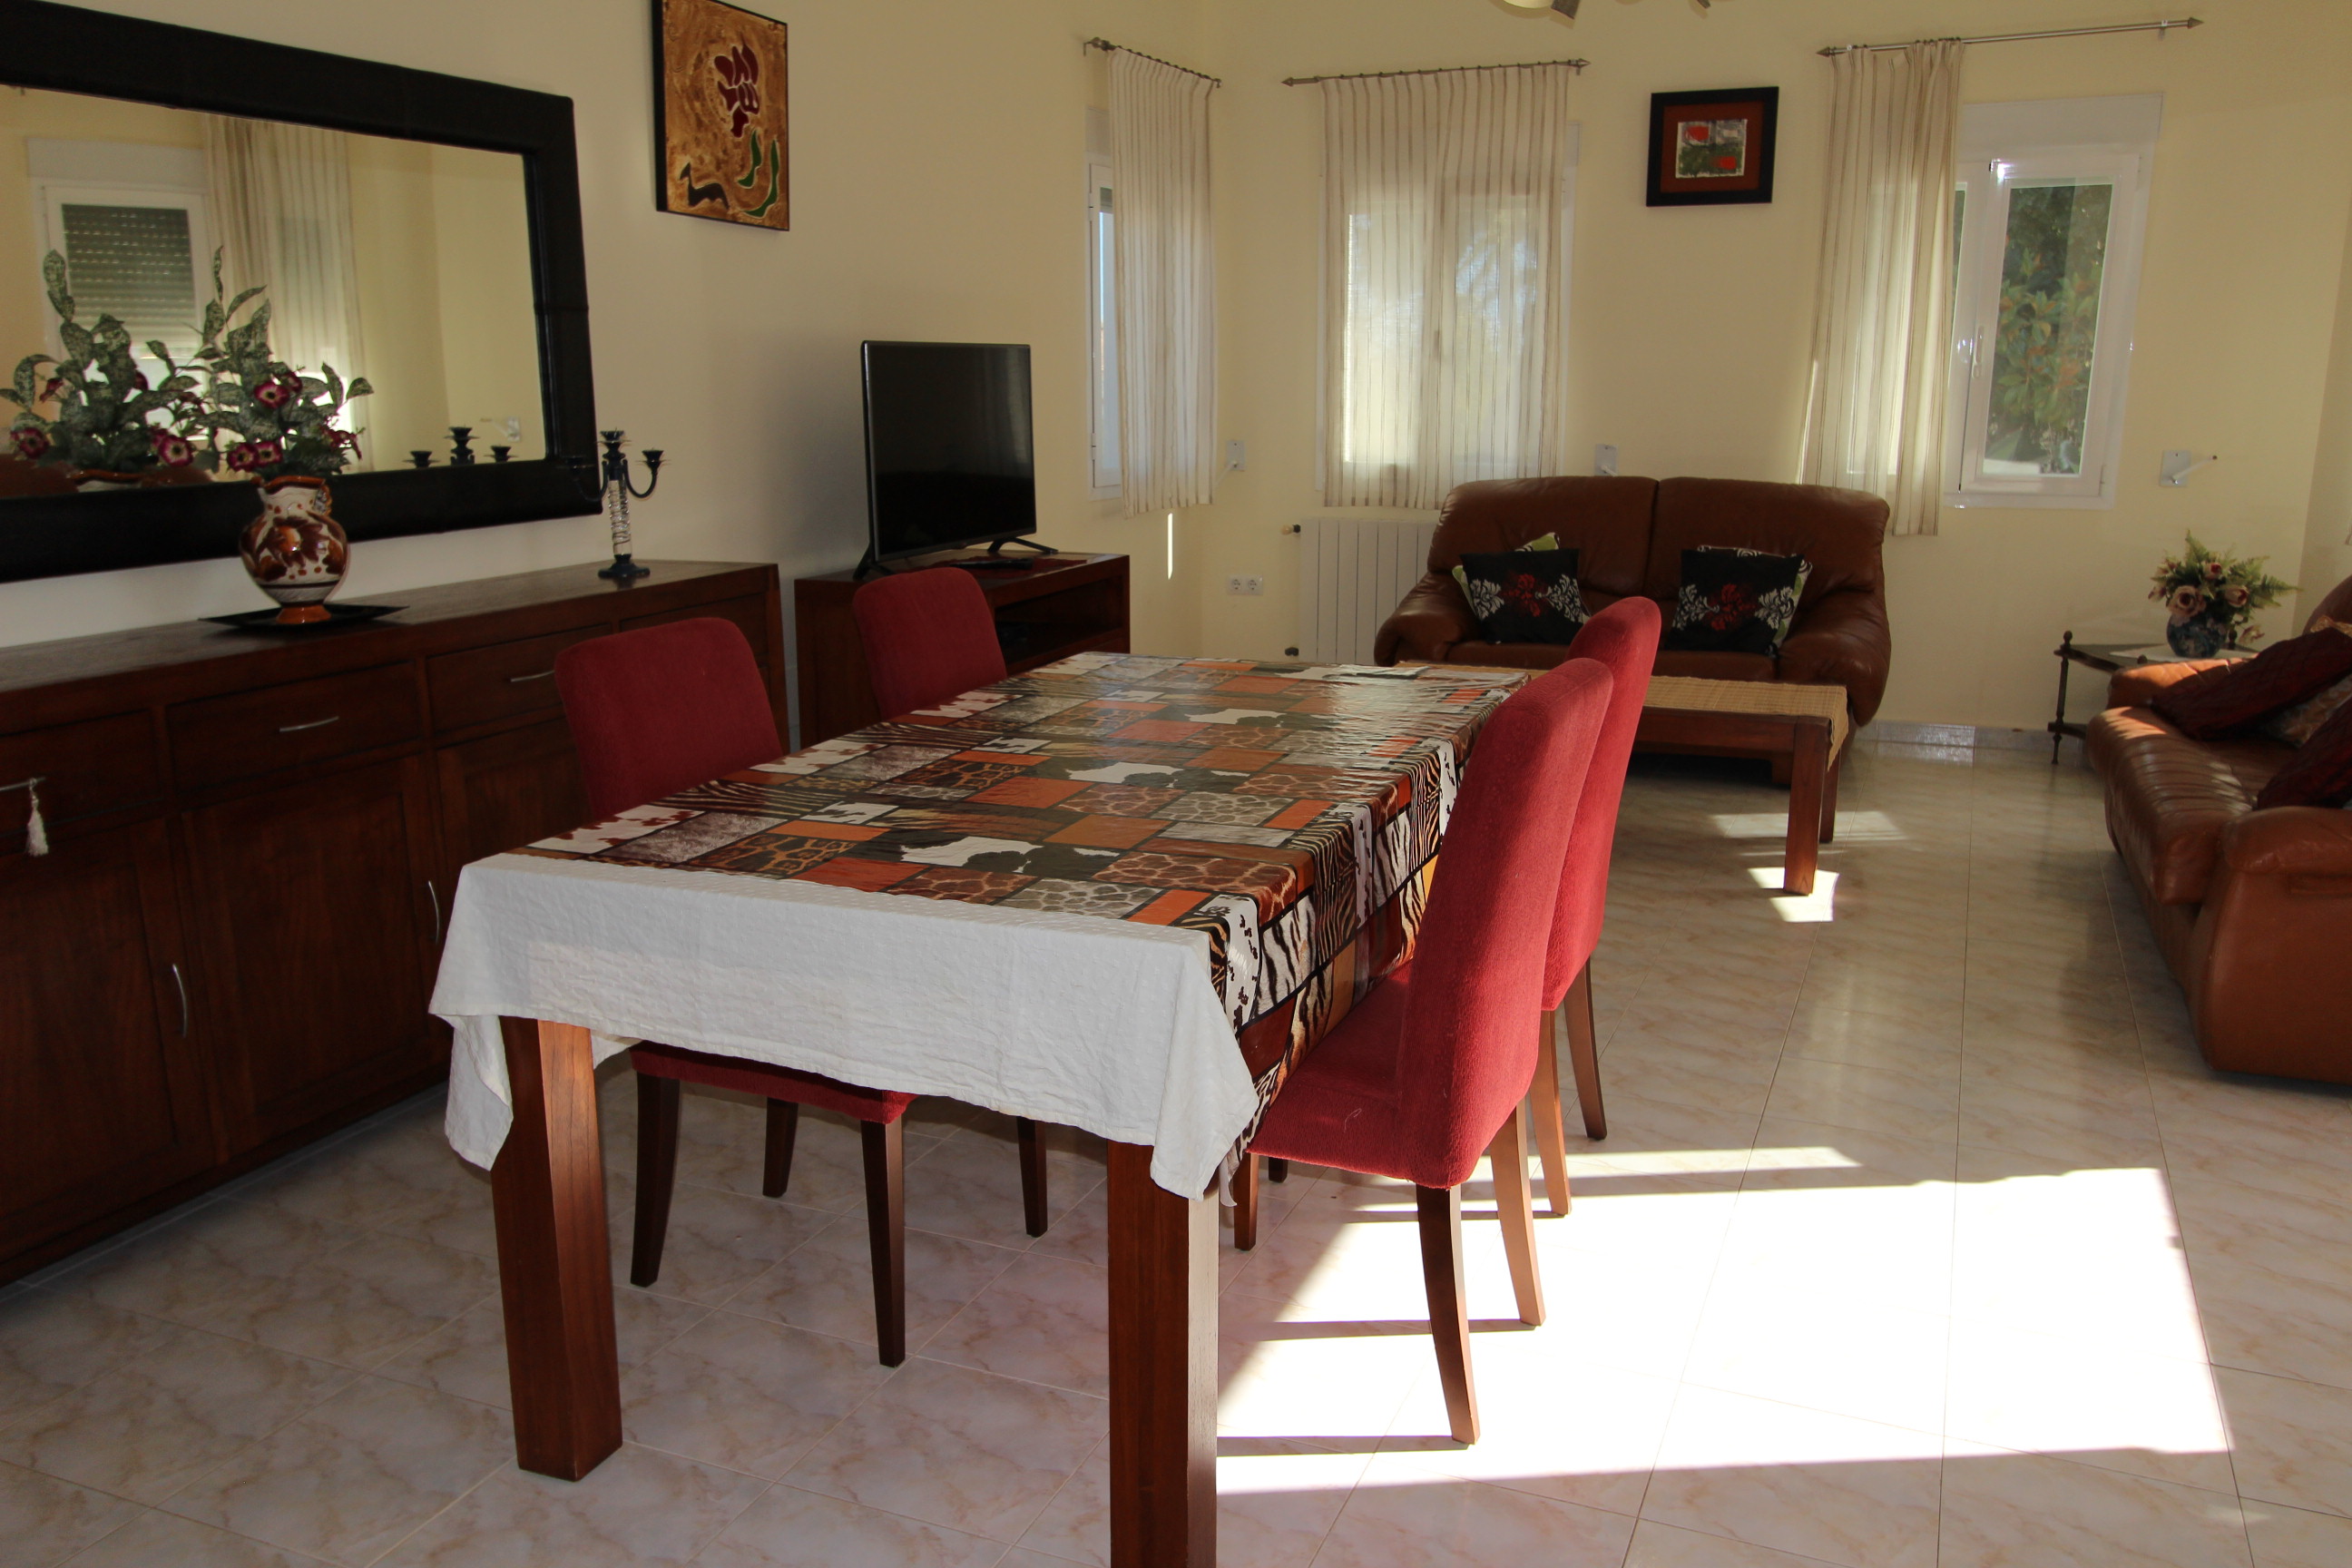 VILLA VERY CLOSE TO THE BEACH AND SUPERMARKETS